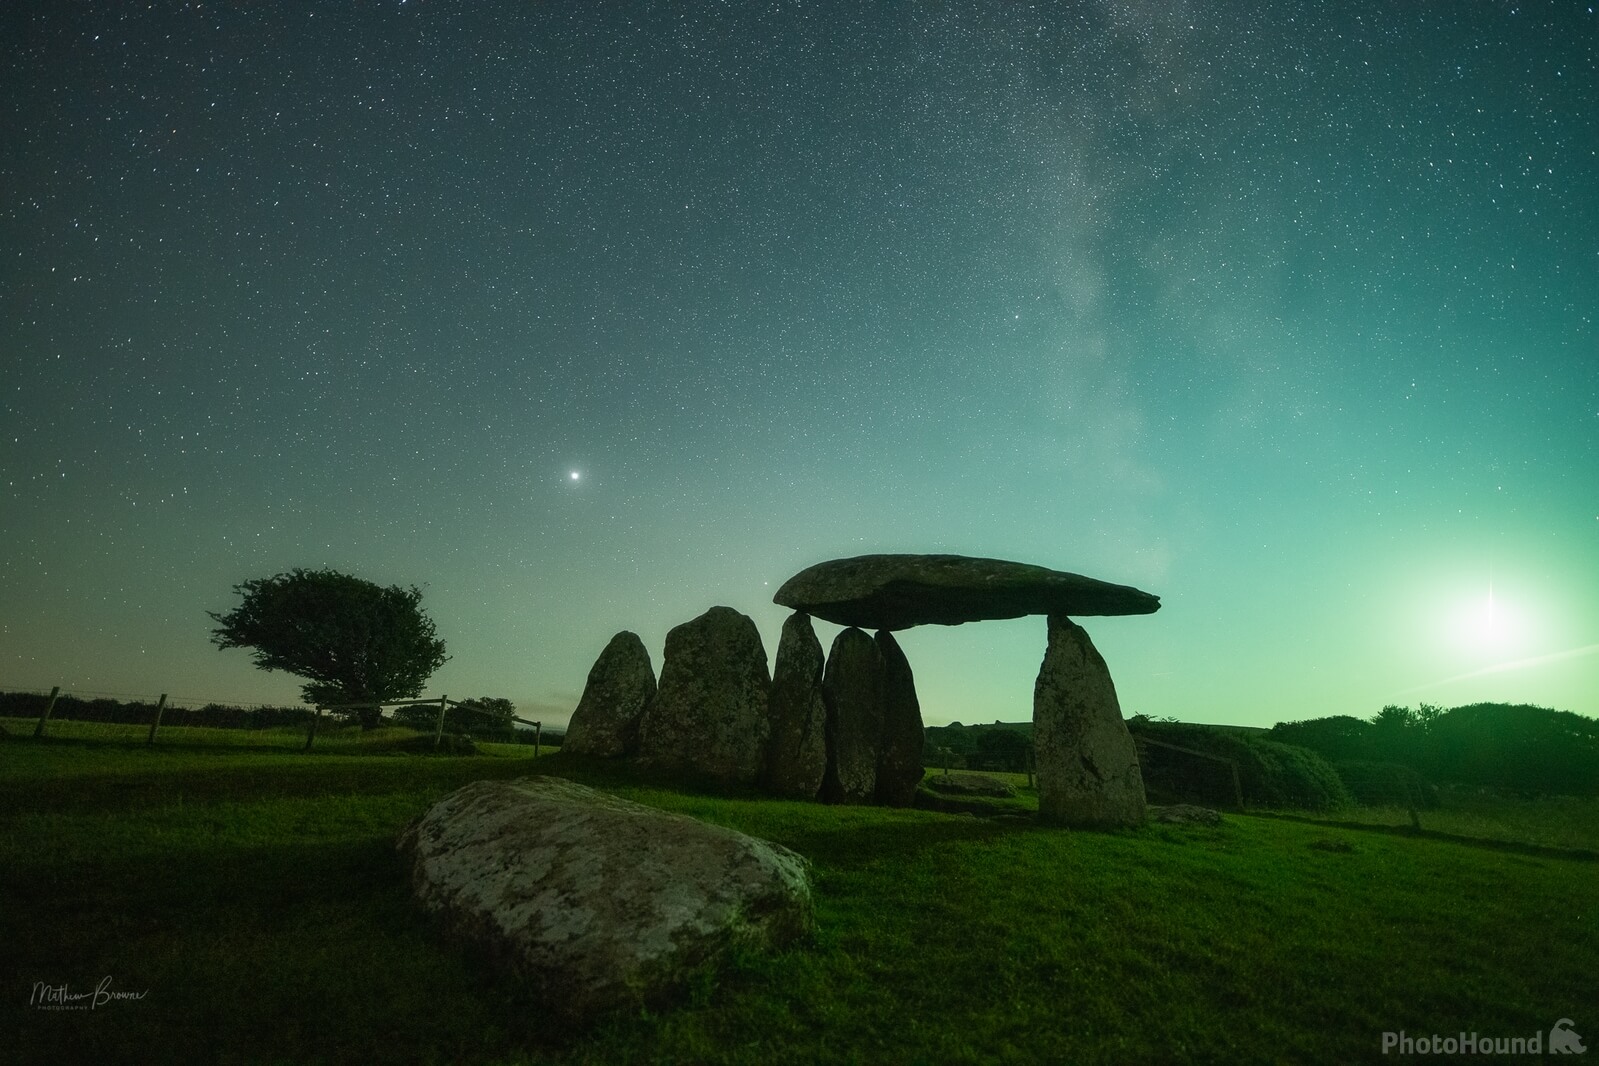 Image of Pentre Ifan Burial Chamber by Mathew Browne